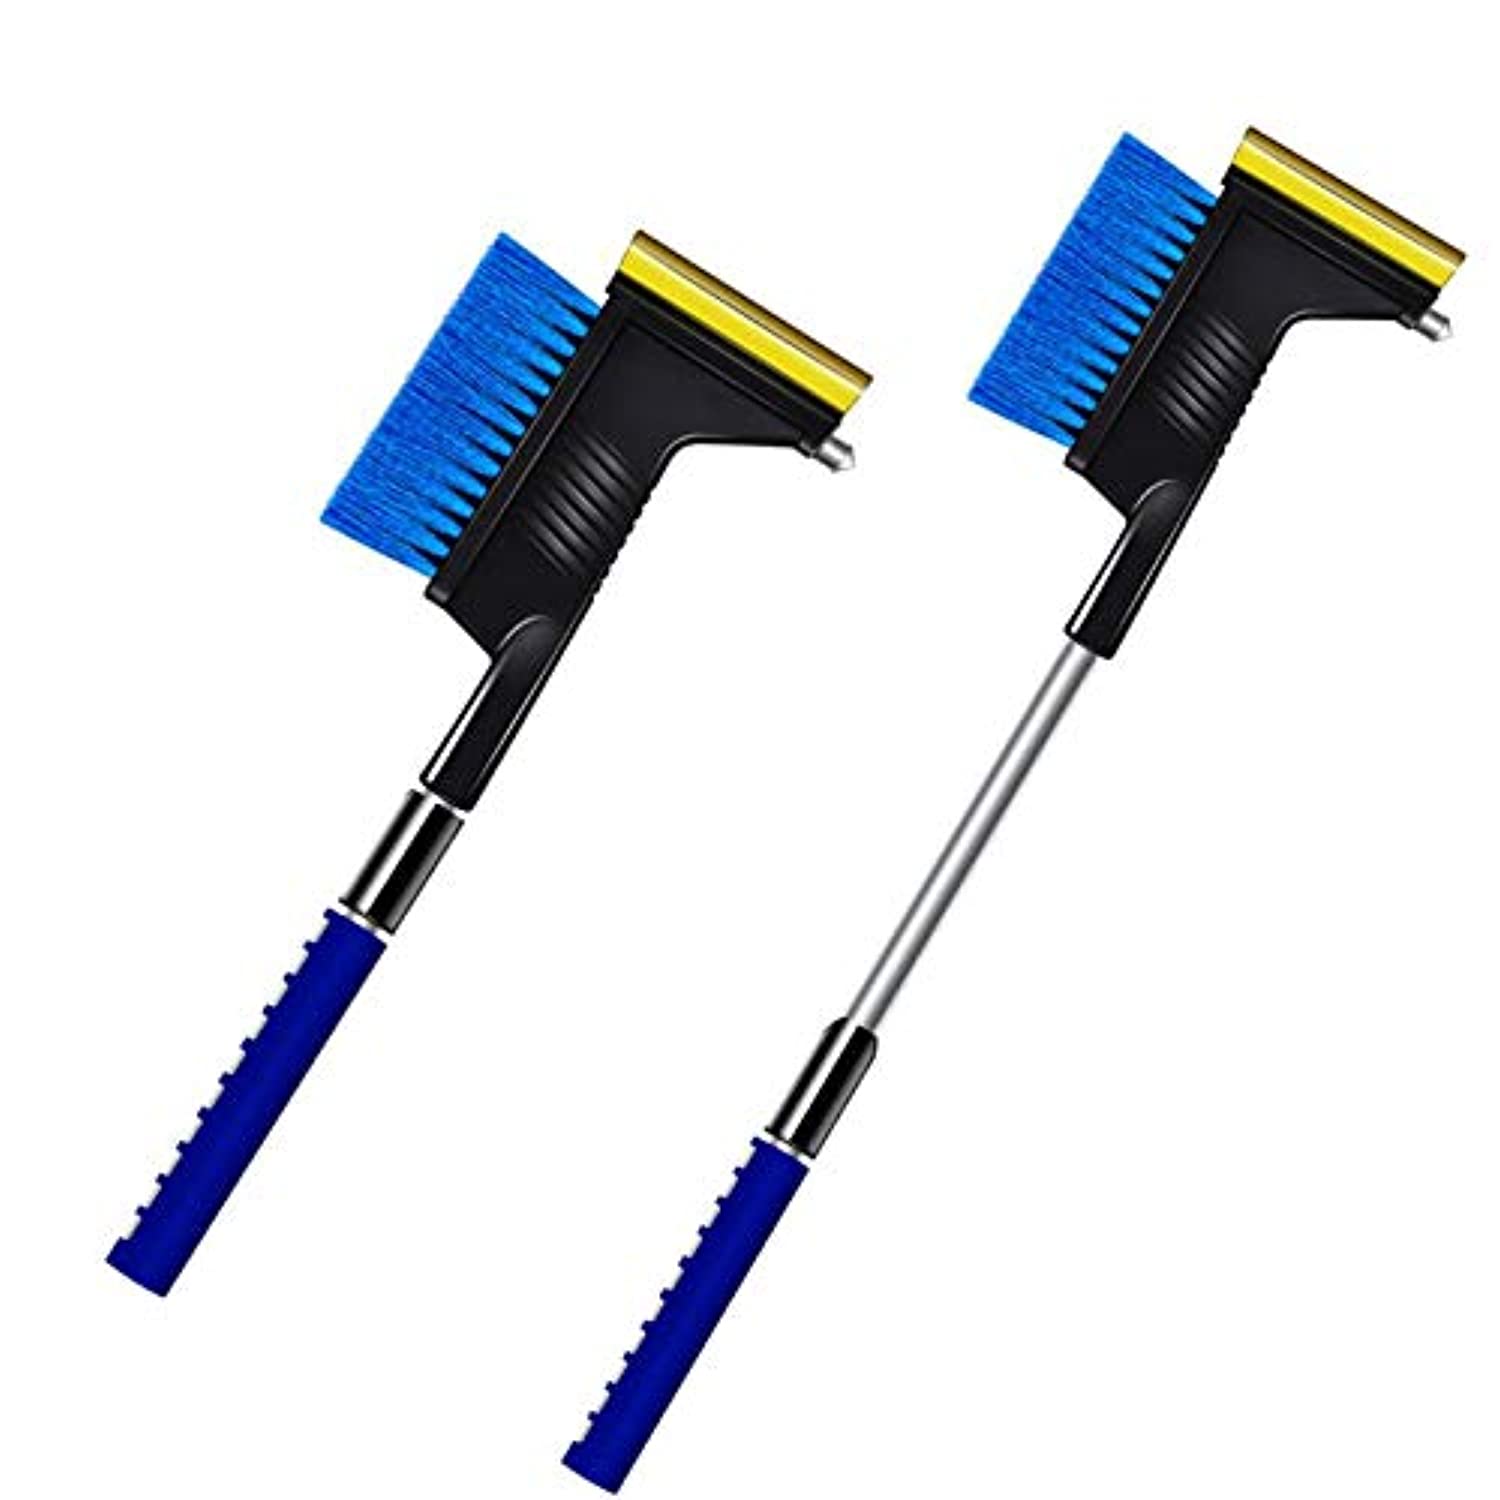 44 Inch Ice Scraper and Snow Brush for Car Windshield, Extendable